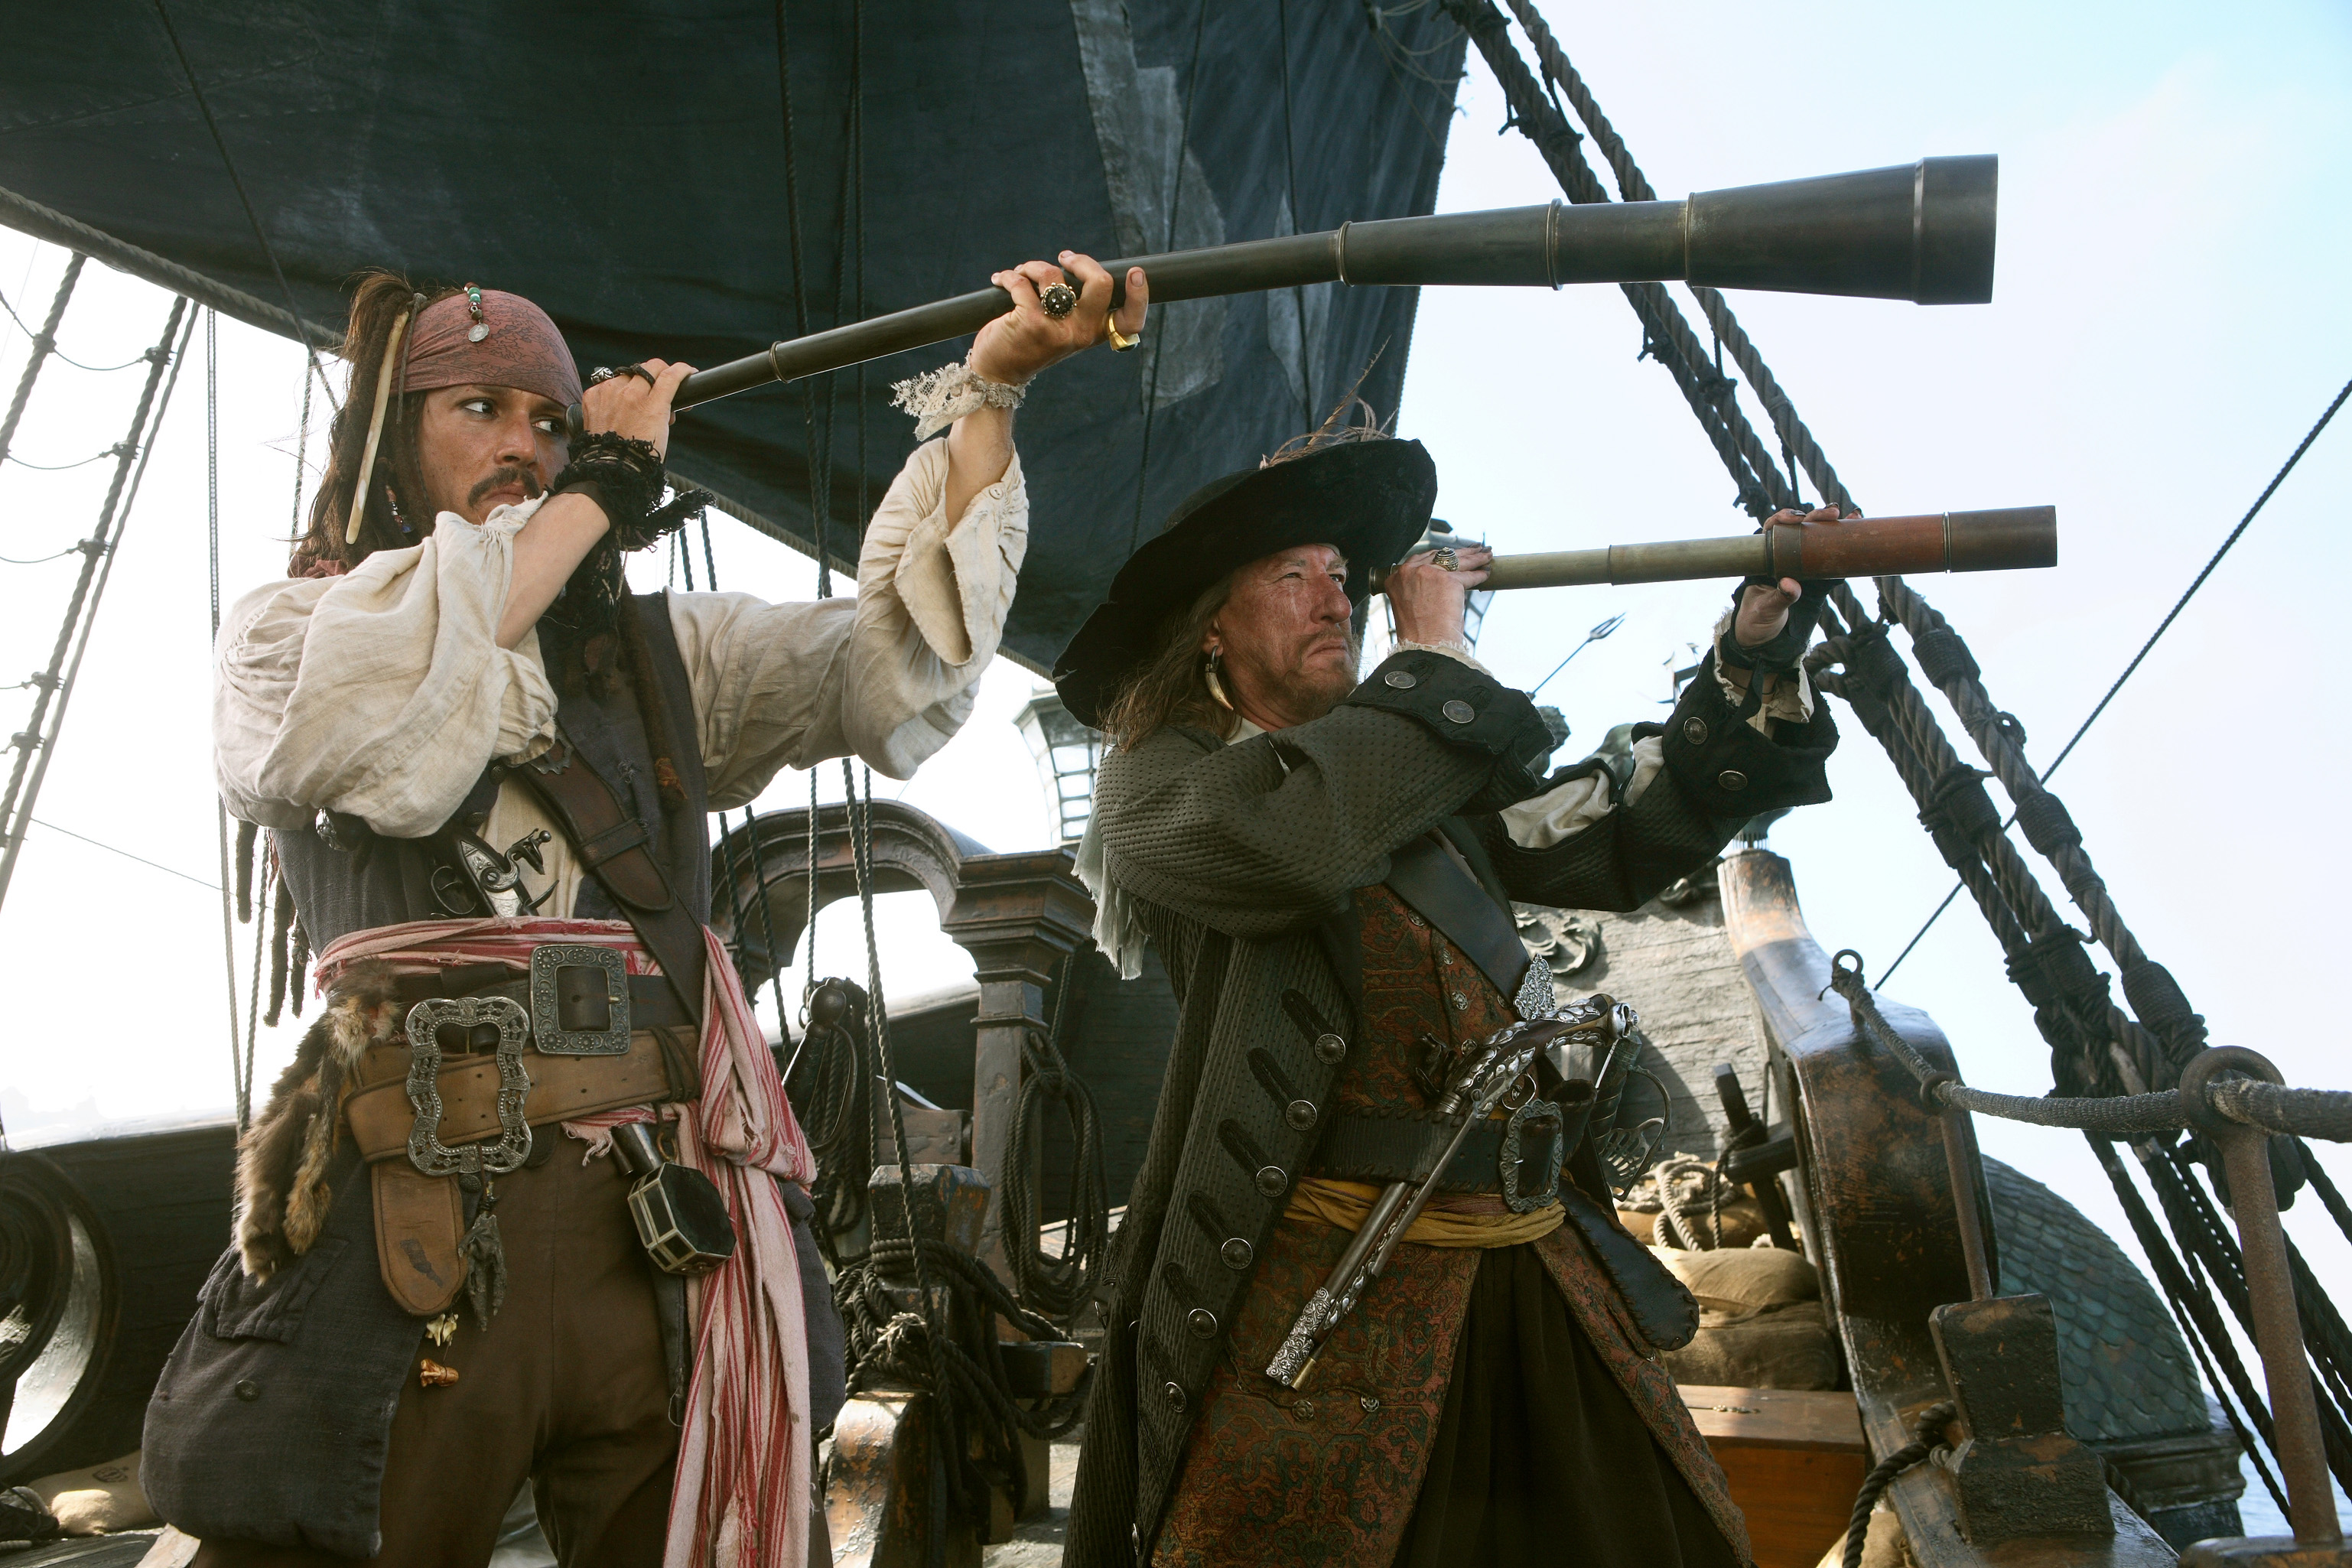 jack sparrow, movie, pirates of the caribbean: at world's end, geoffrey rush, hector barbossa, johnny depp, pirates of the caribbean images